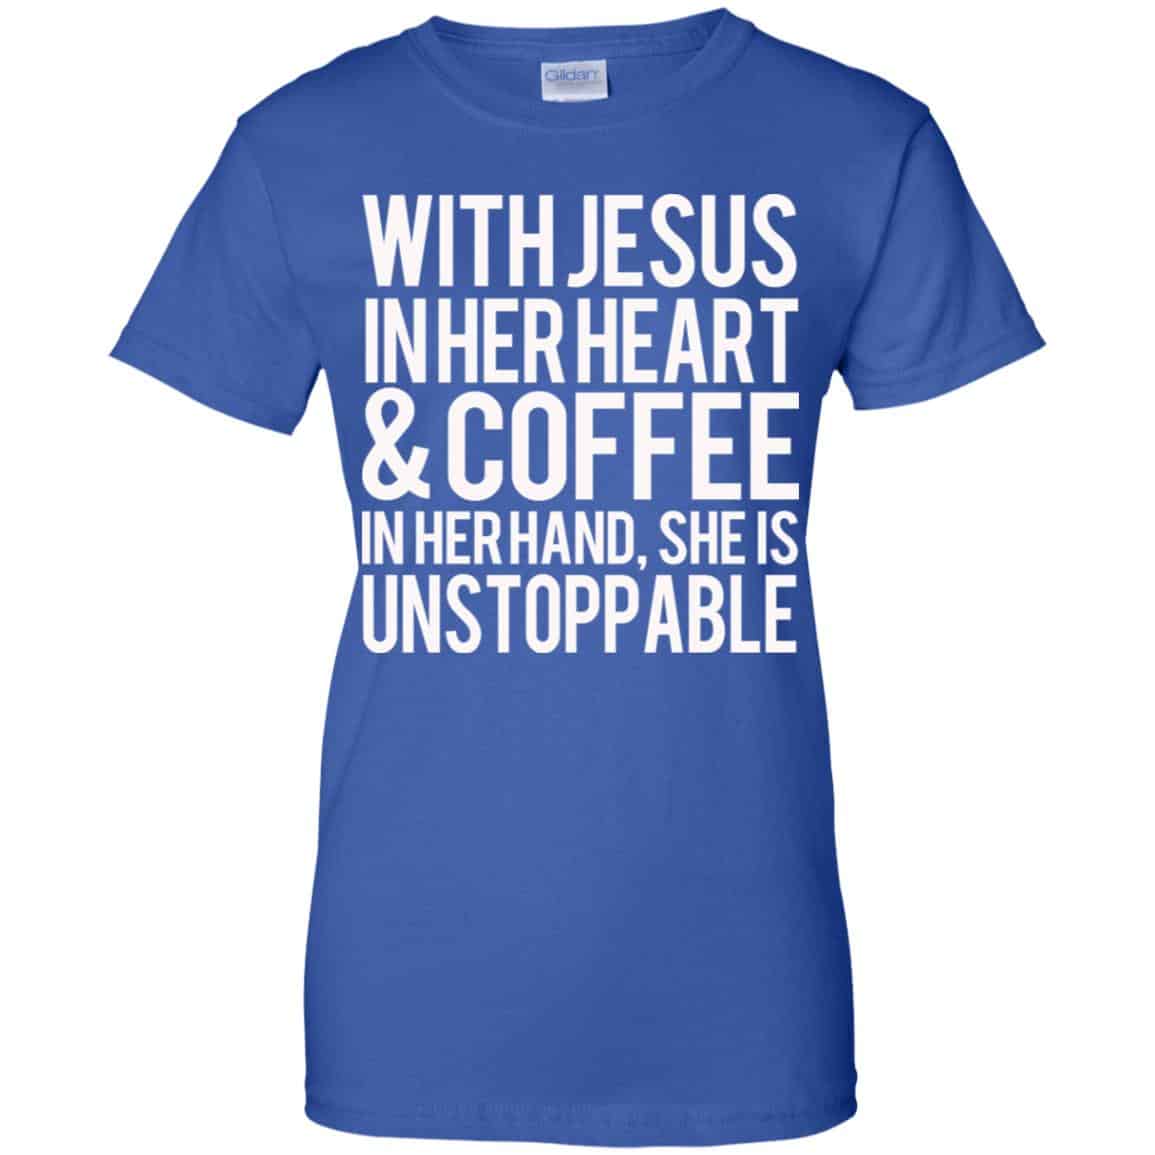 With Jesus In Her Heart & Coffee In Her Hand She Is Unstoppable T ...